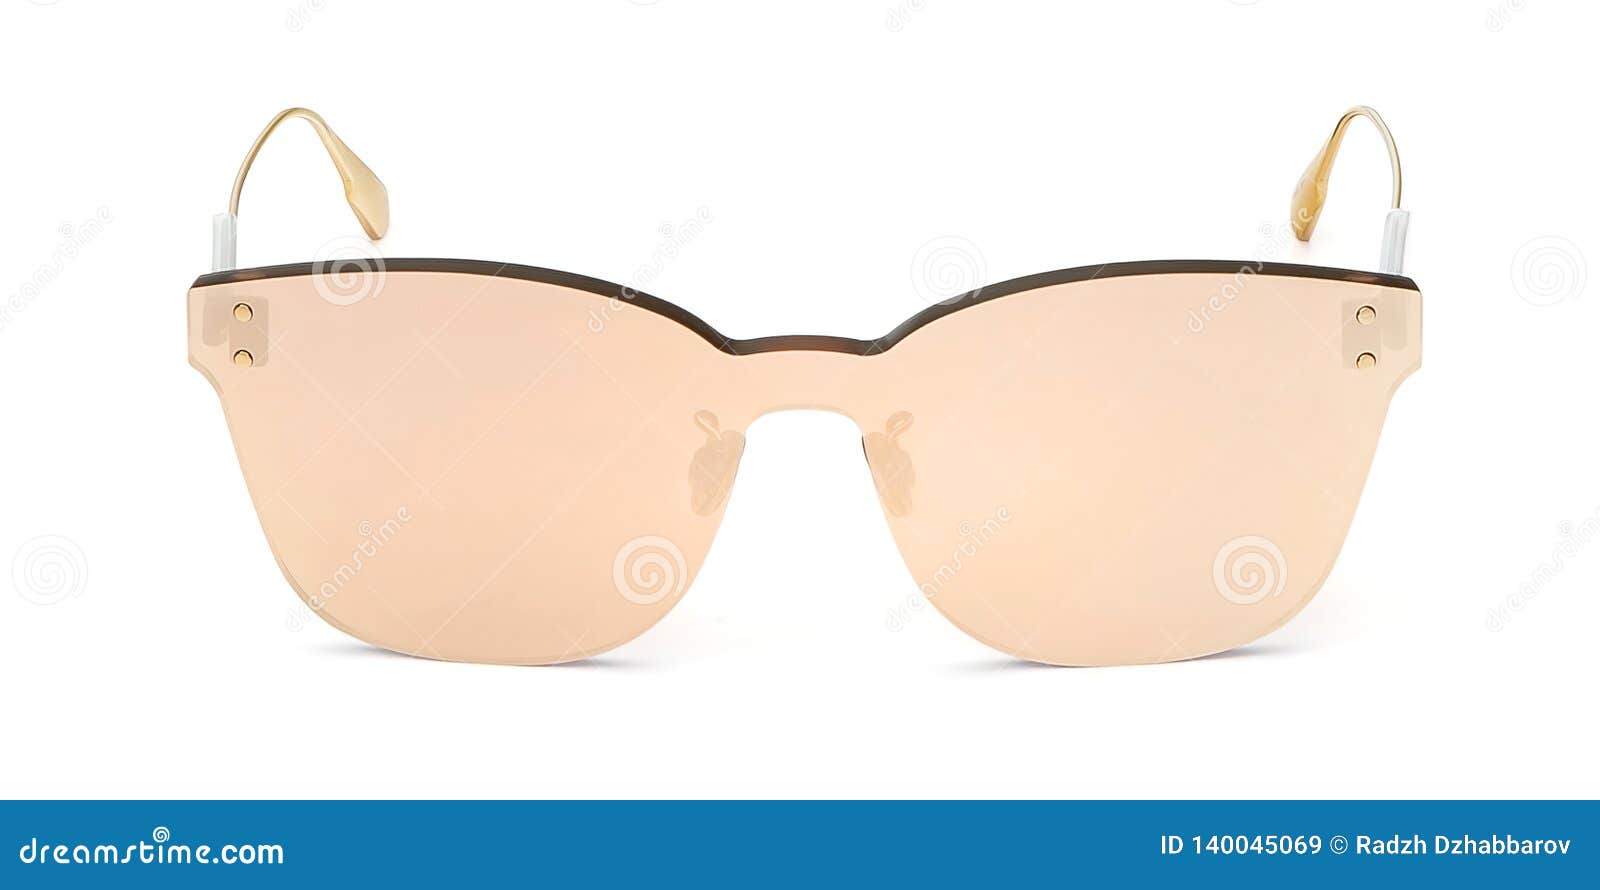 Download Summer Front View Sunglasses Isolated On White Background Mirror Eyeglasses Mockup For Your Design Stock Image Image Of Beach Classic 140045069